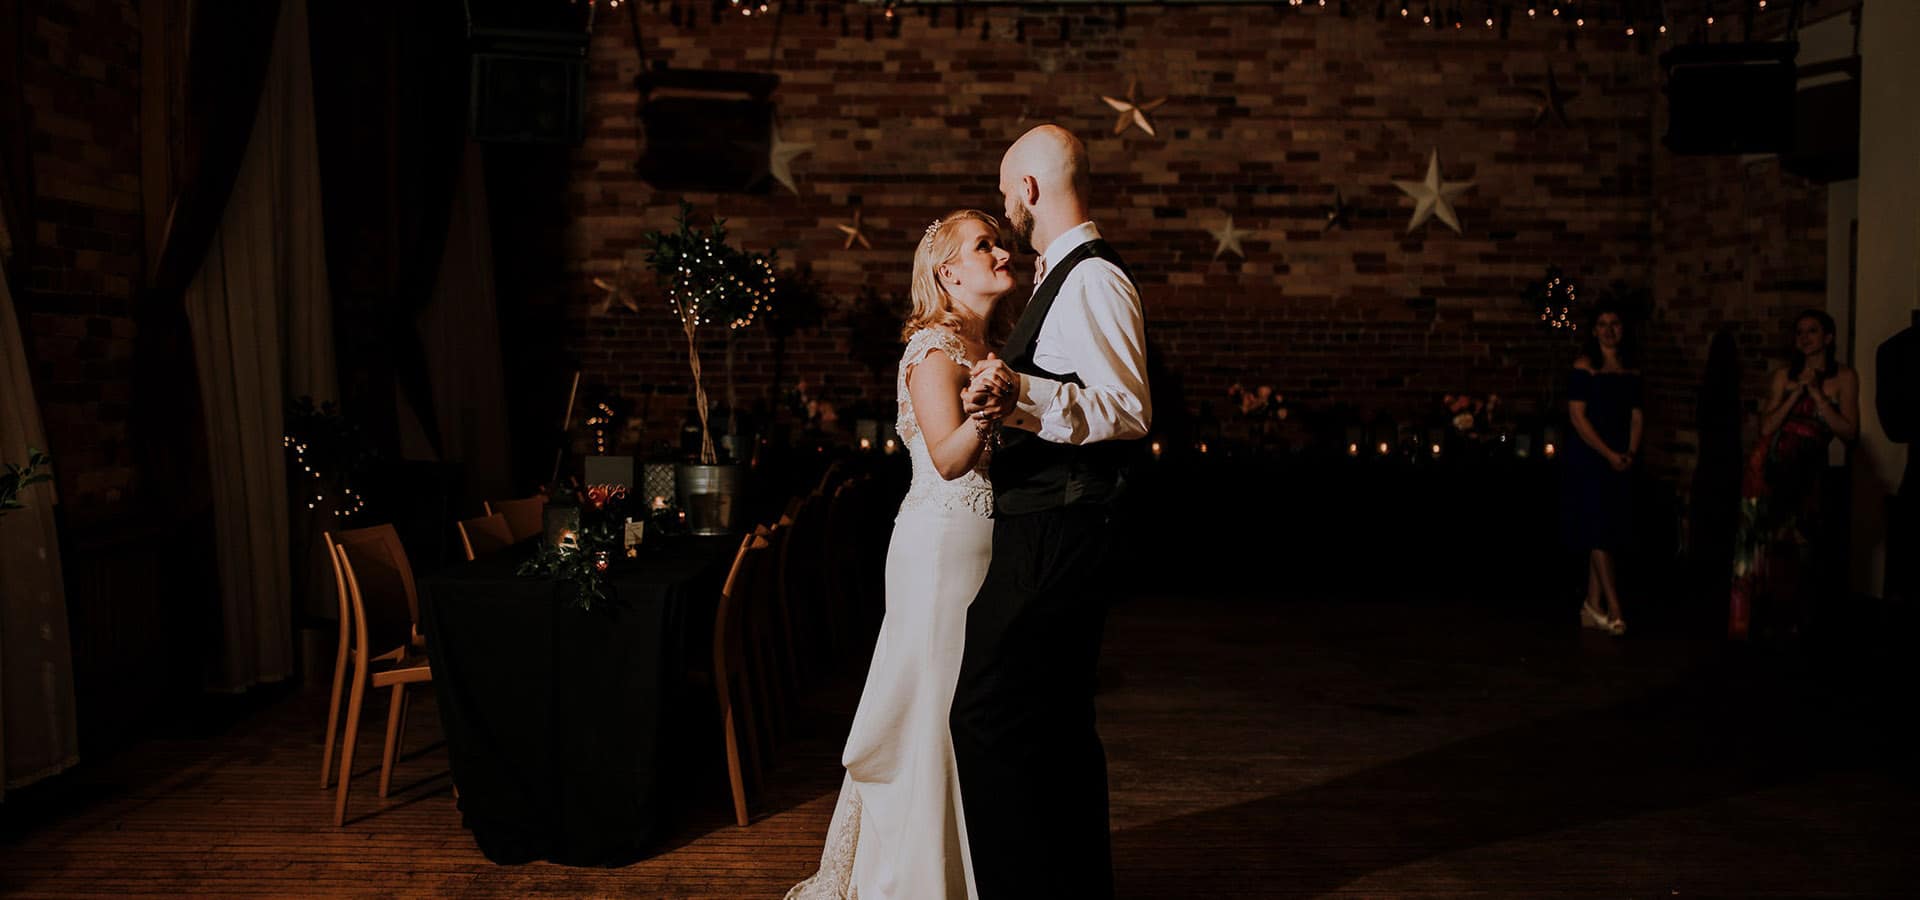 Hero image for Francesca and Dave’s Warm Gladstone Hotel Wedding